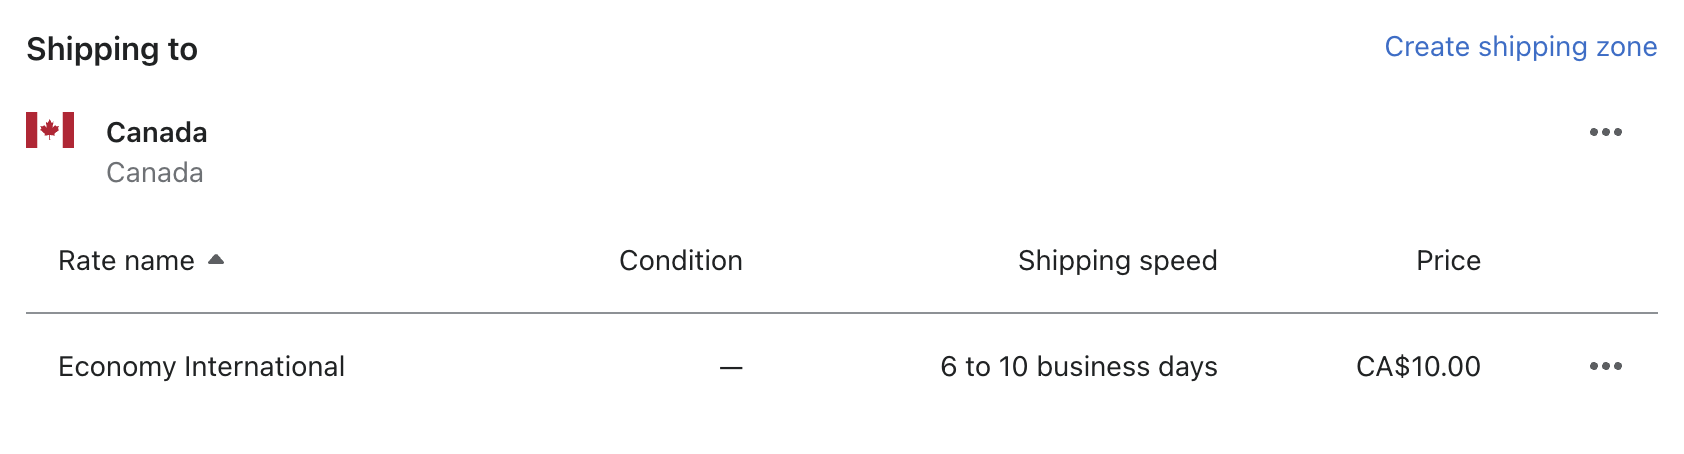 Shipping_zone_in_Shopify.png